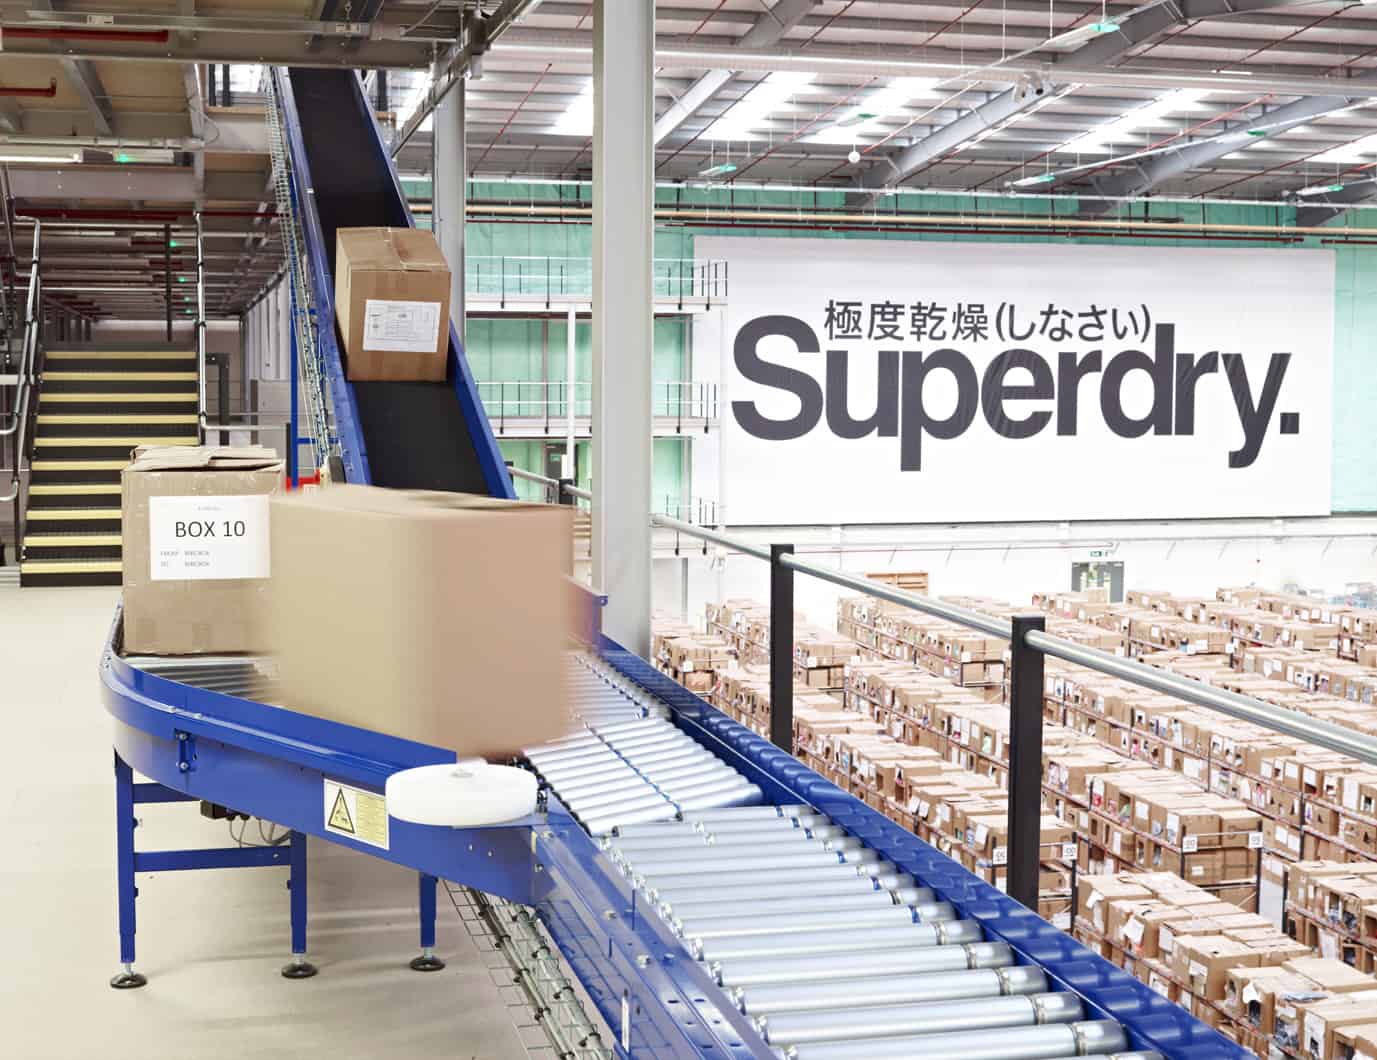 Superdry opts for Consignor solution